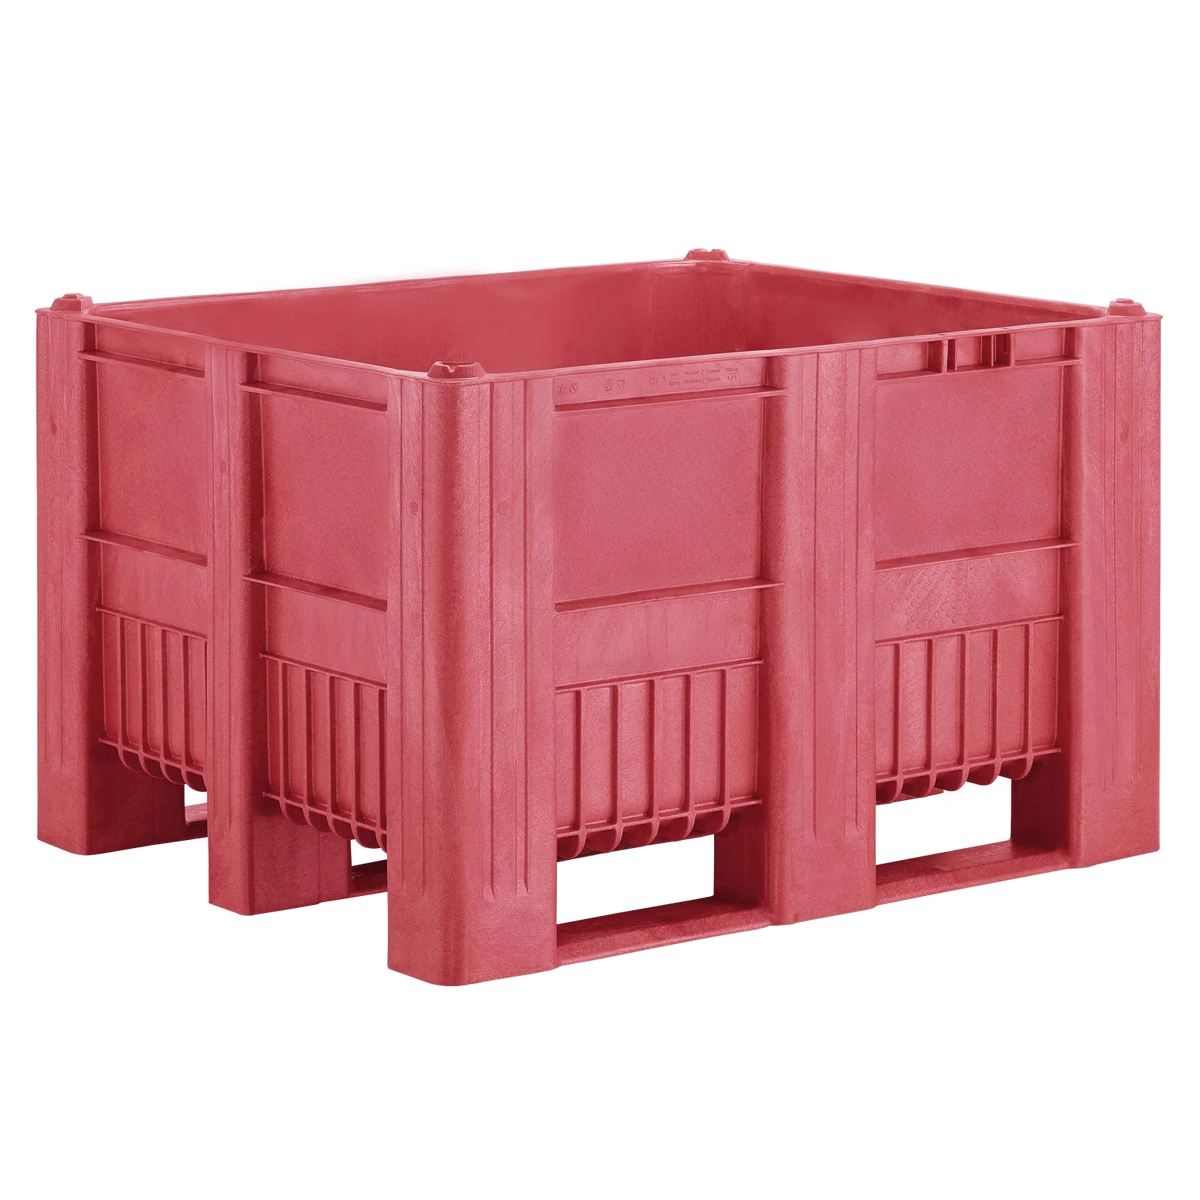 Solid Sided Red Dolav Pallet Box